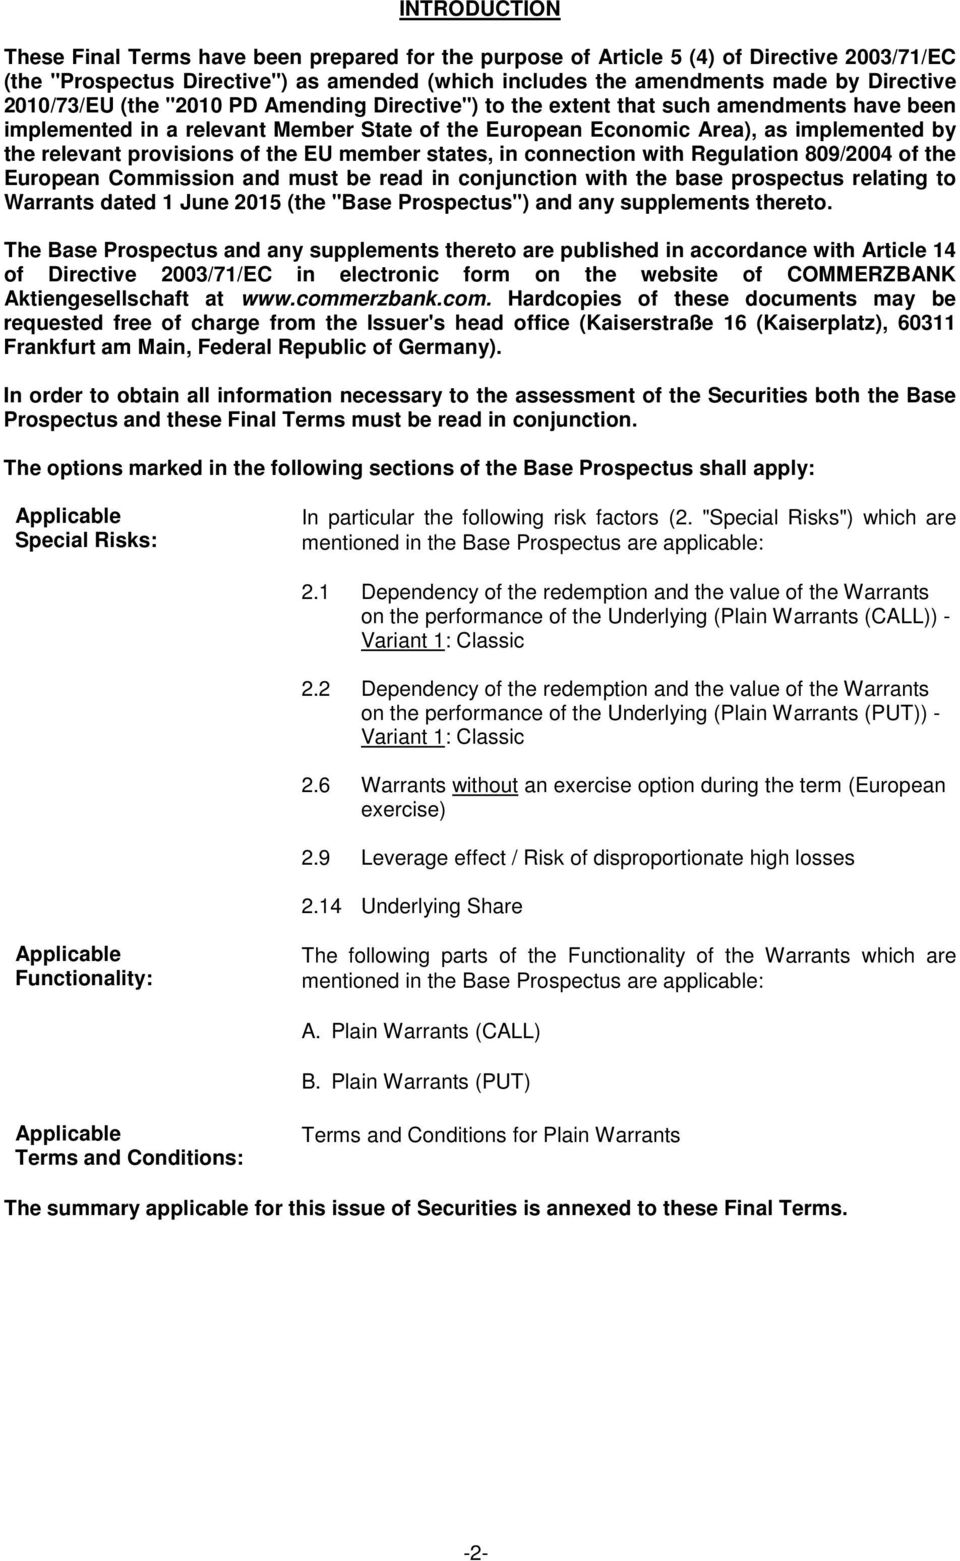 provisions of the EU member states, in connection with Regulation 809/2004 of the European Commission and must be read in conjunction with the base prospectus relating to Warrants dated 1 June (the